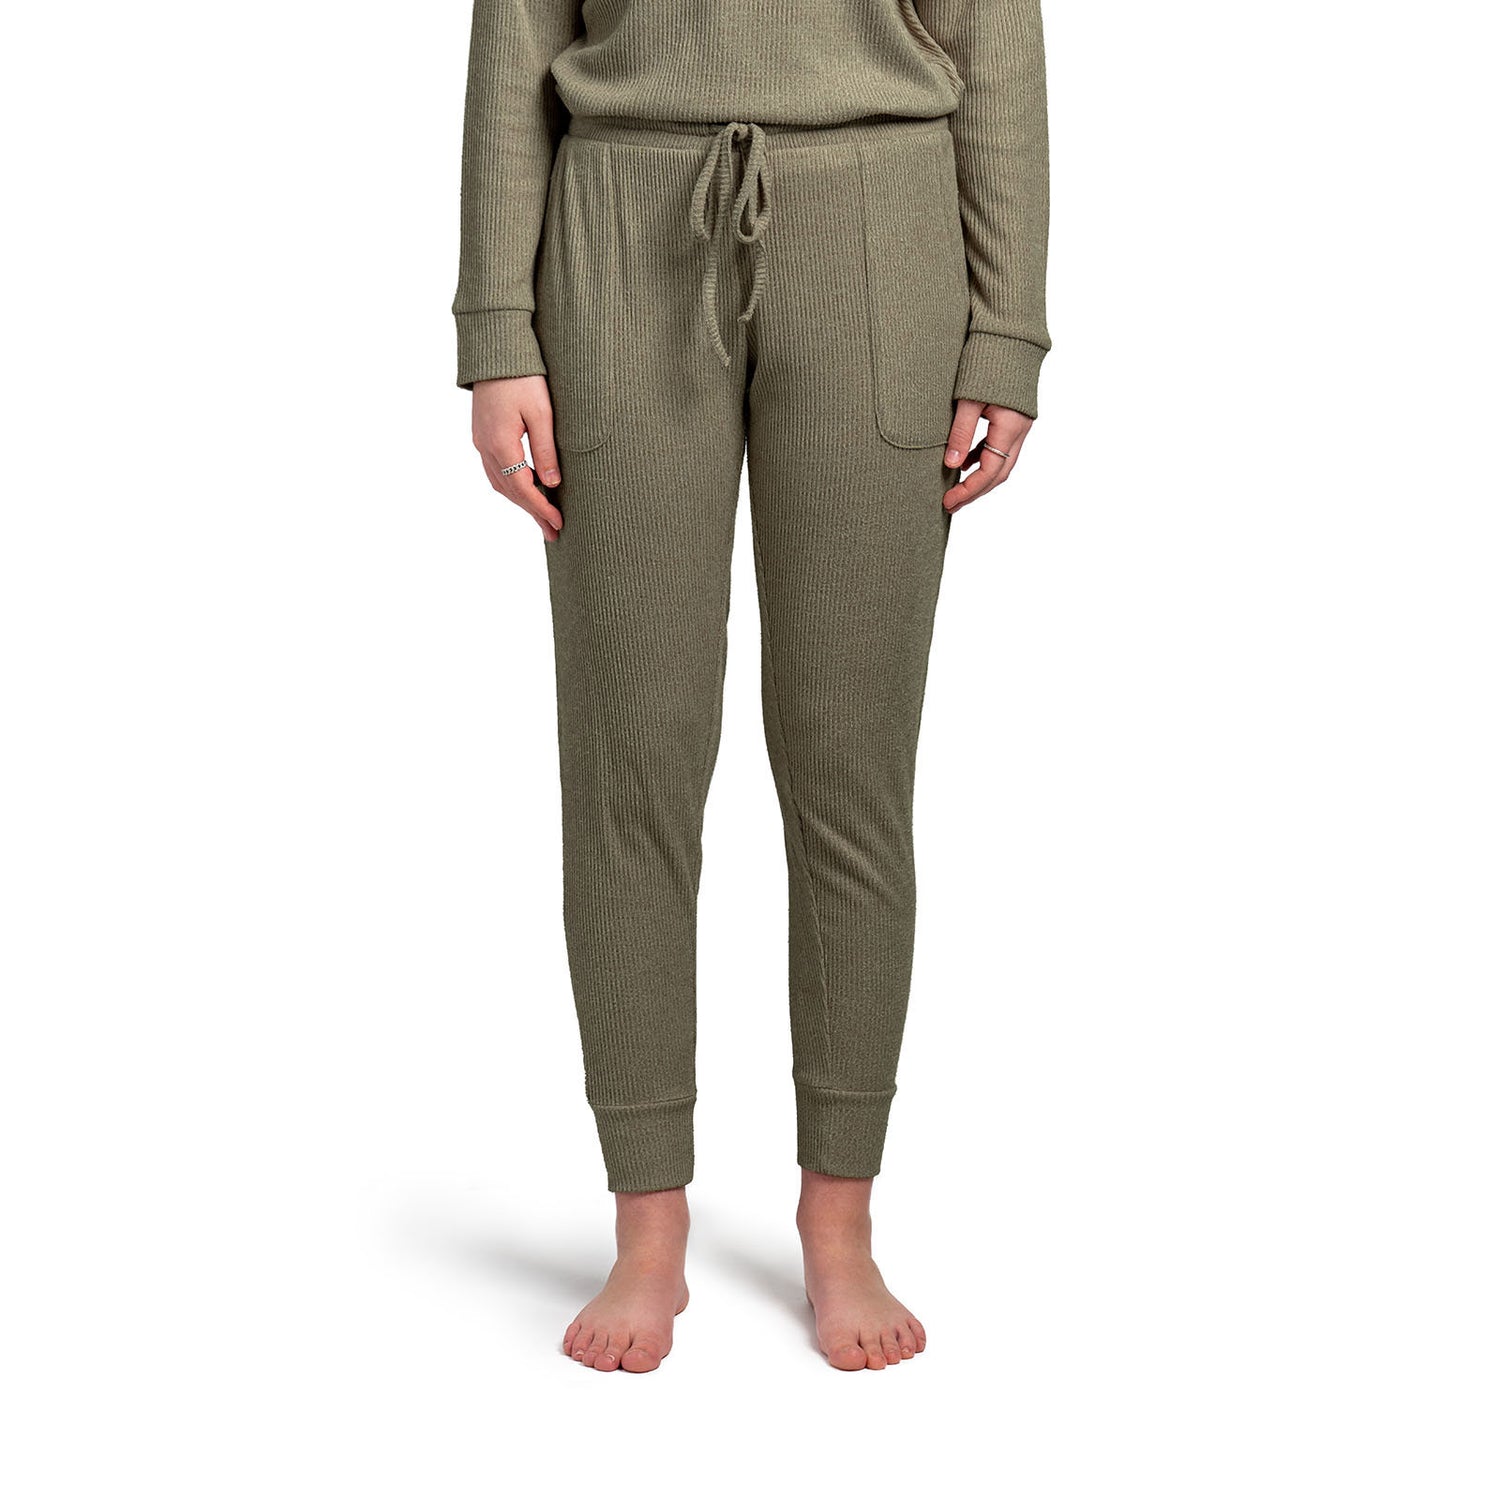 1600 × 1600px  Treat yourself to cuddle worthy softness! We curated these cozy rib knit pants for luxurious comfort with a buttery mid-weight fabric and cozy side pockets. Matching drawstring pouch packaging makes this item a great gift! Color soft green..